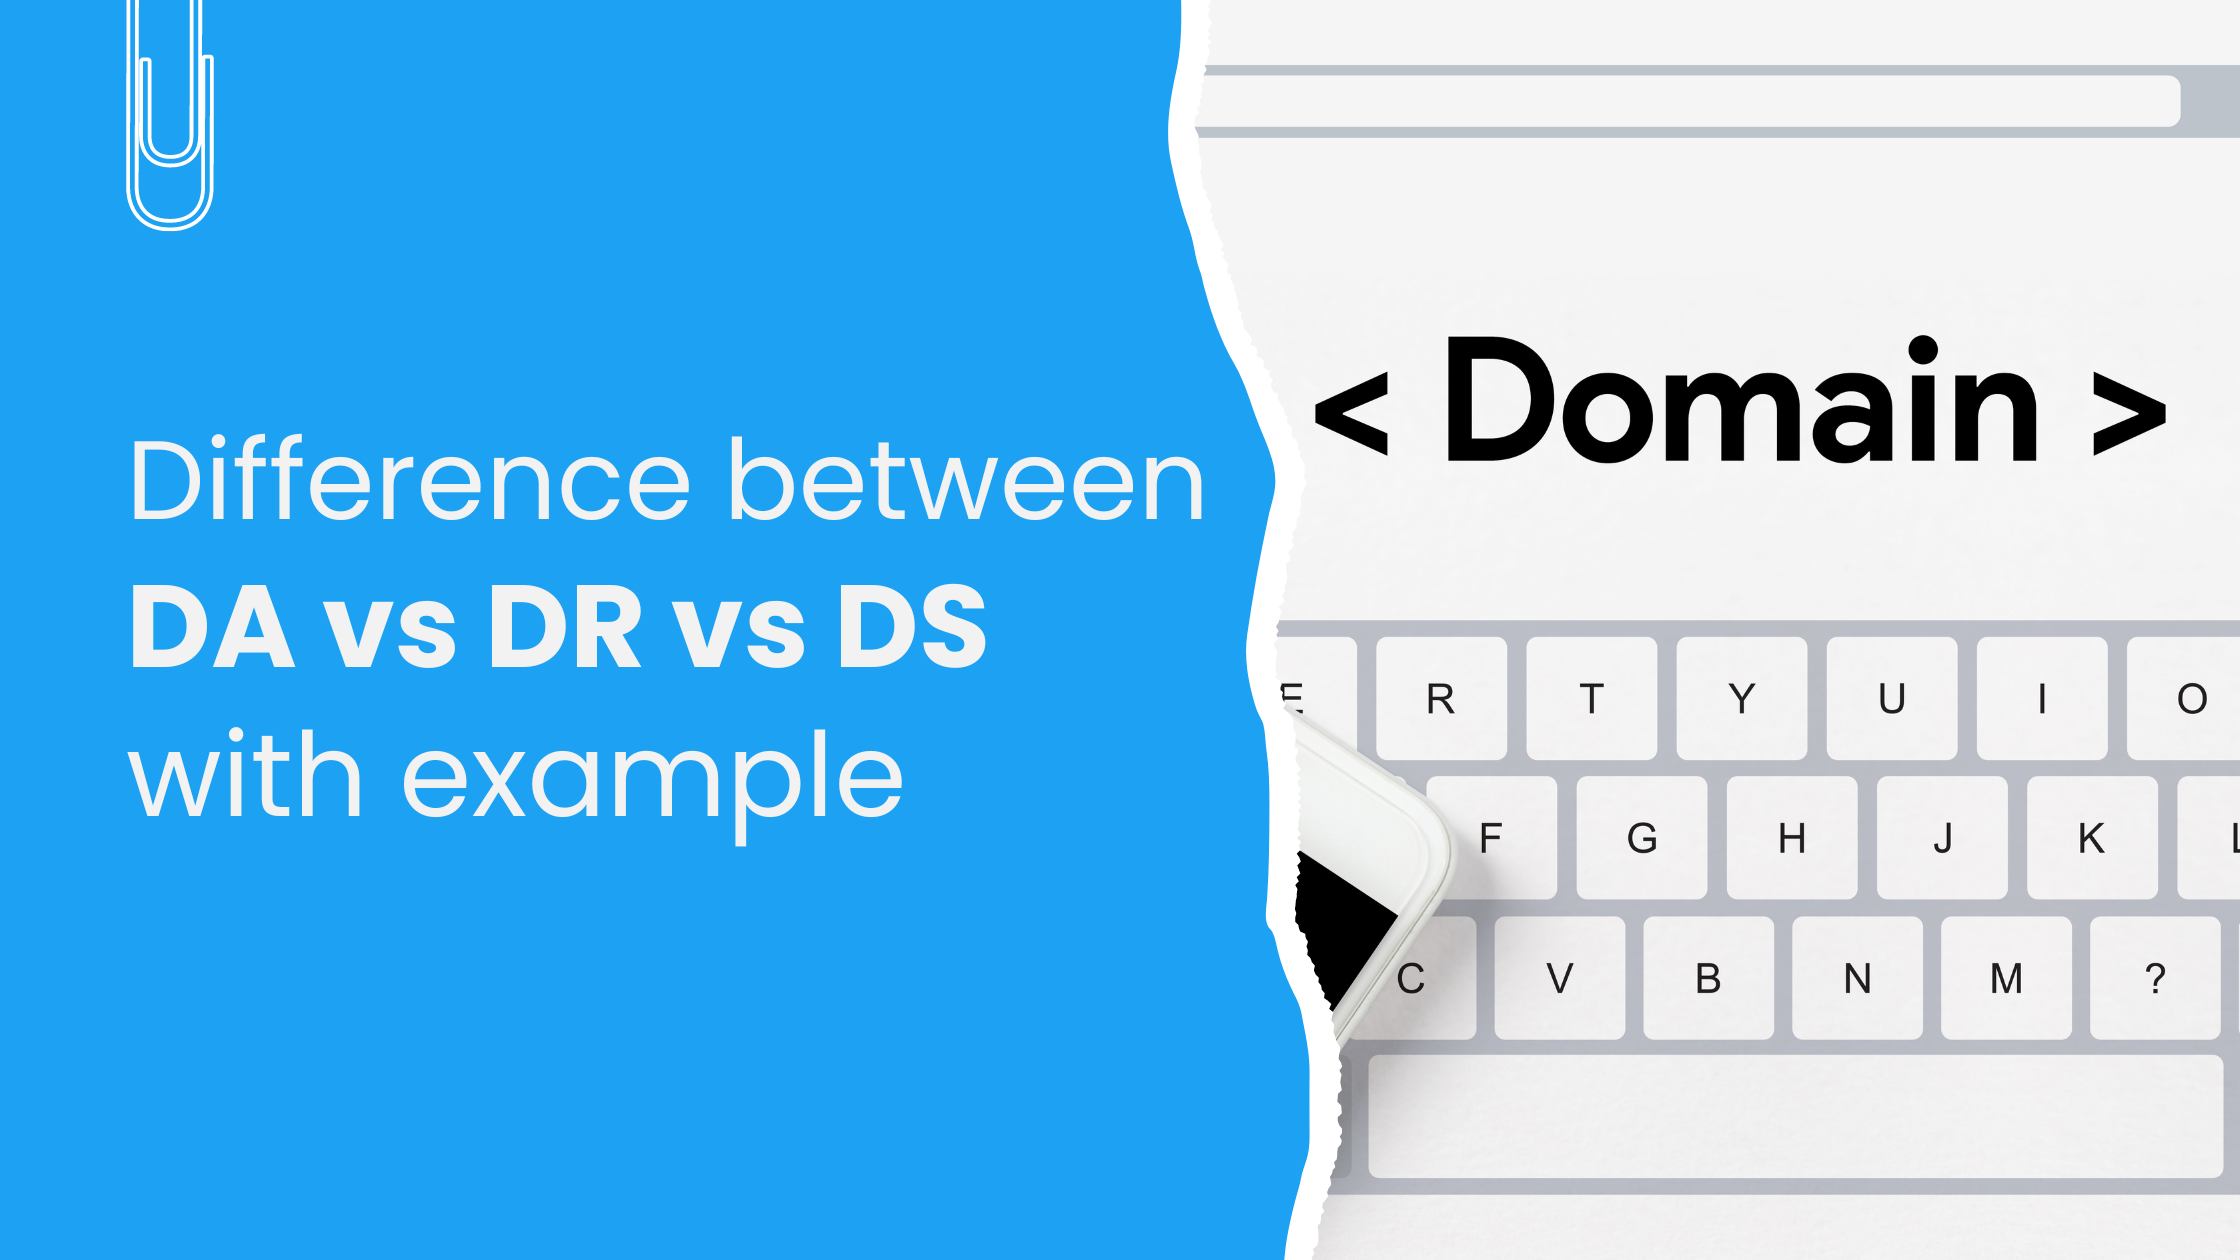 Understanding Domain Authority (DA), Domain Rating (DR), Domain Score (DS), Page Authority (PA), and Page Rank (PR) for SEO Success